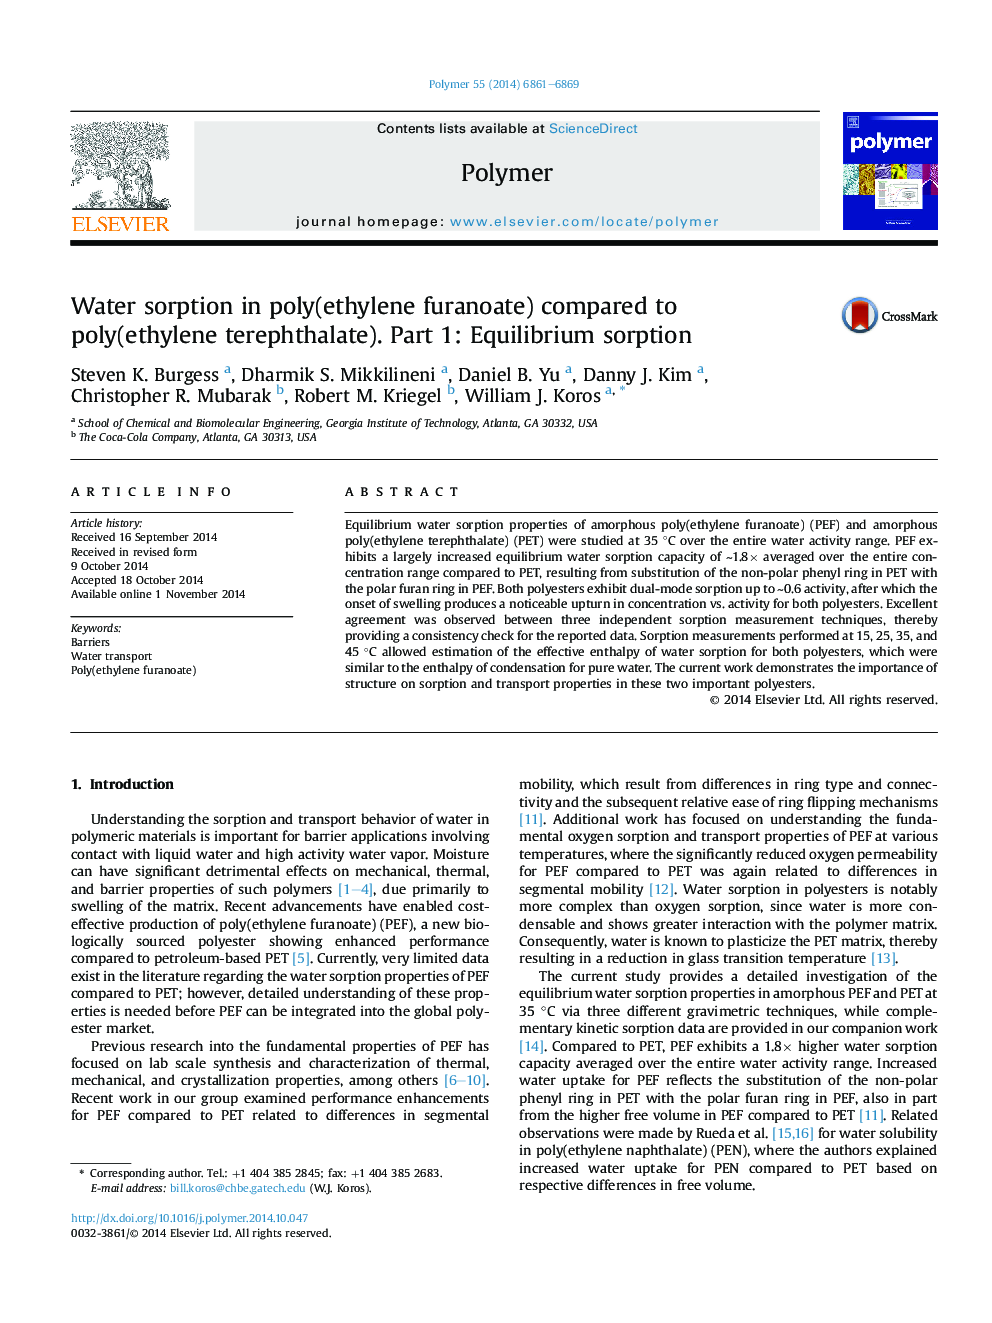 Water sorption in poly(ethylene furanoate) compared to poly(ethyleneÂ terephthalate). Part 1: Equilibrium sorption